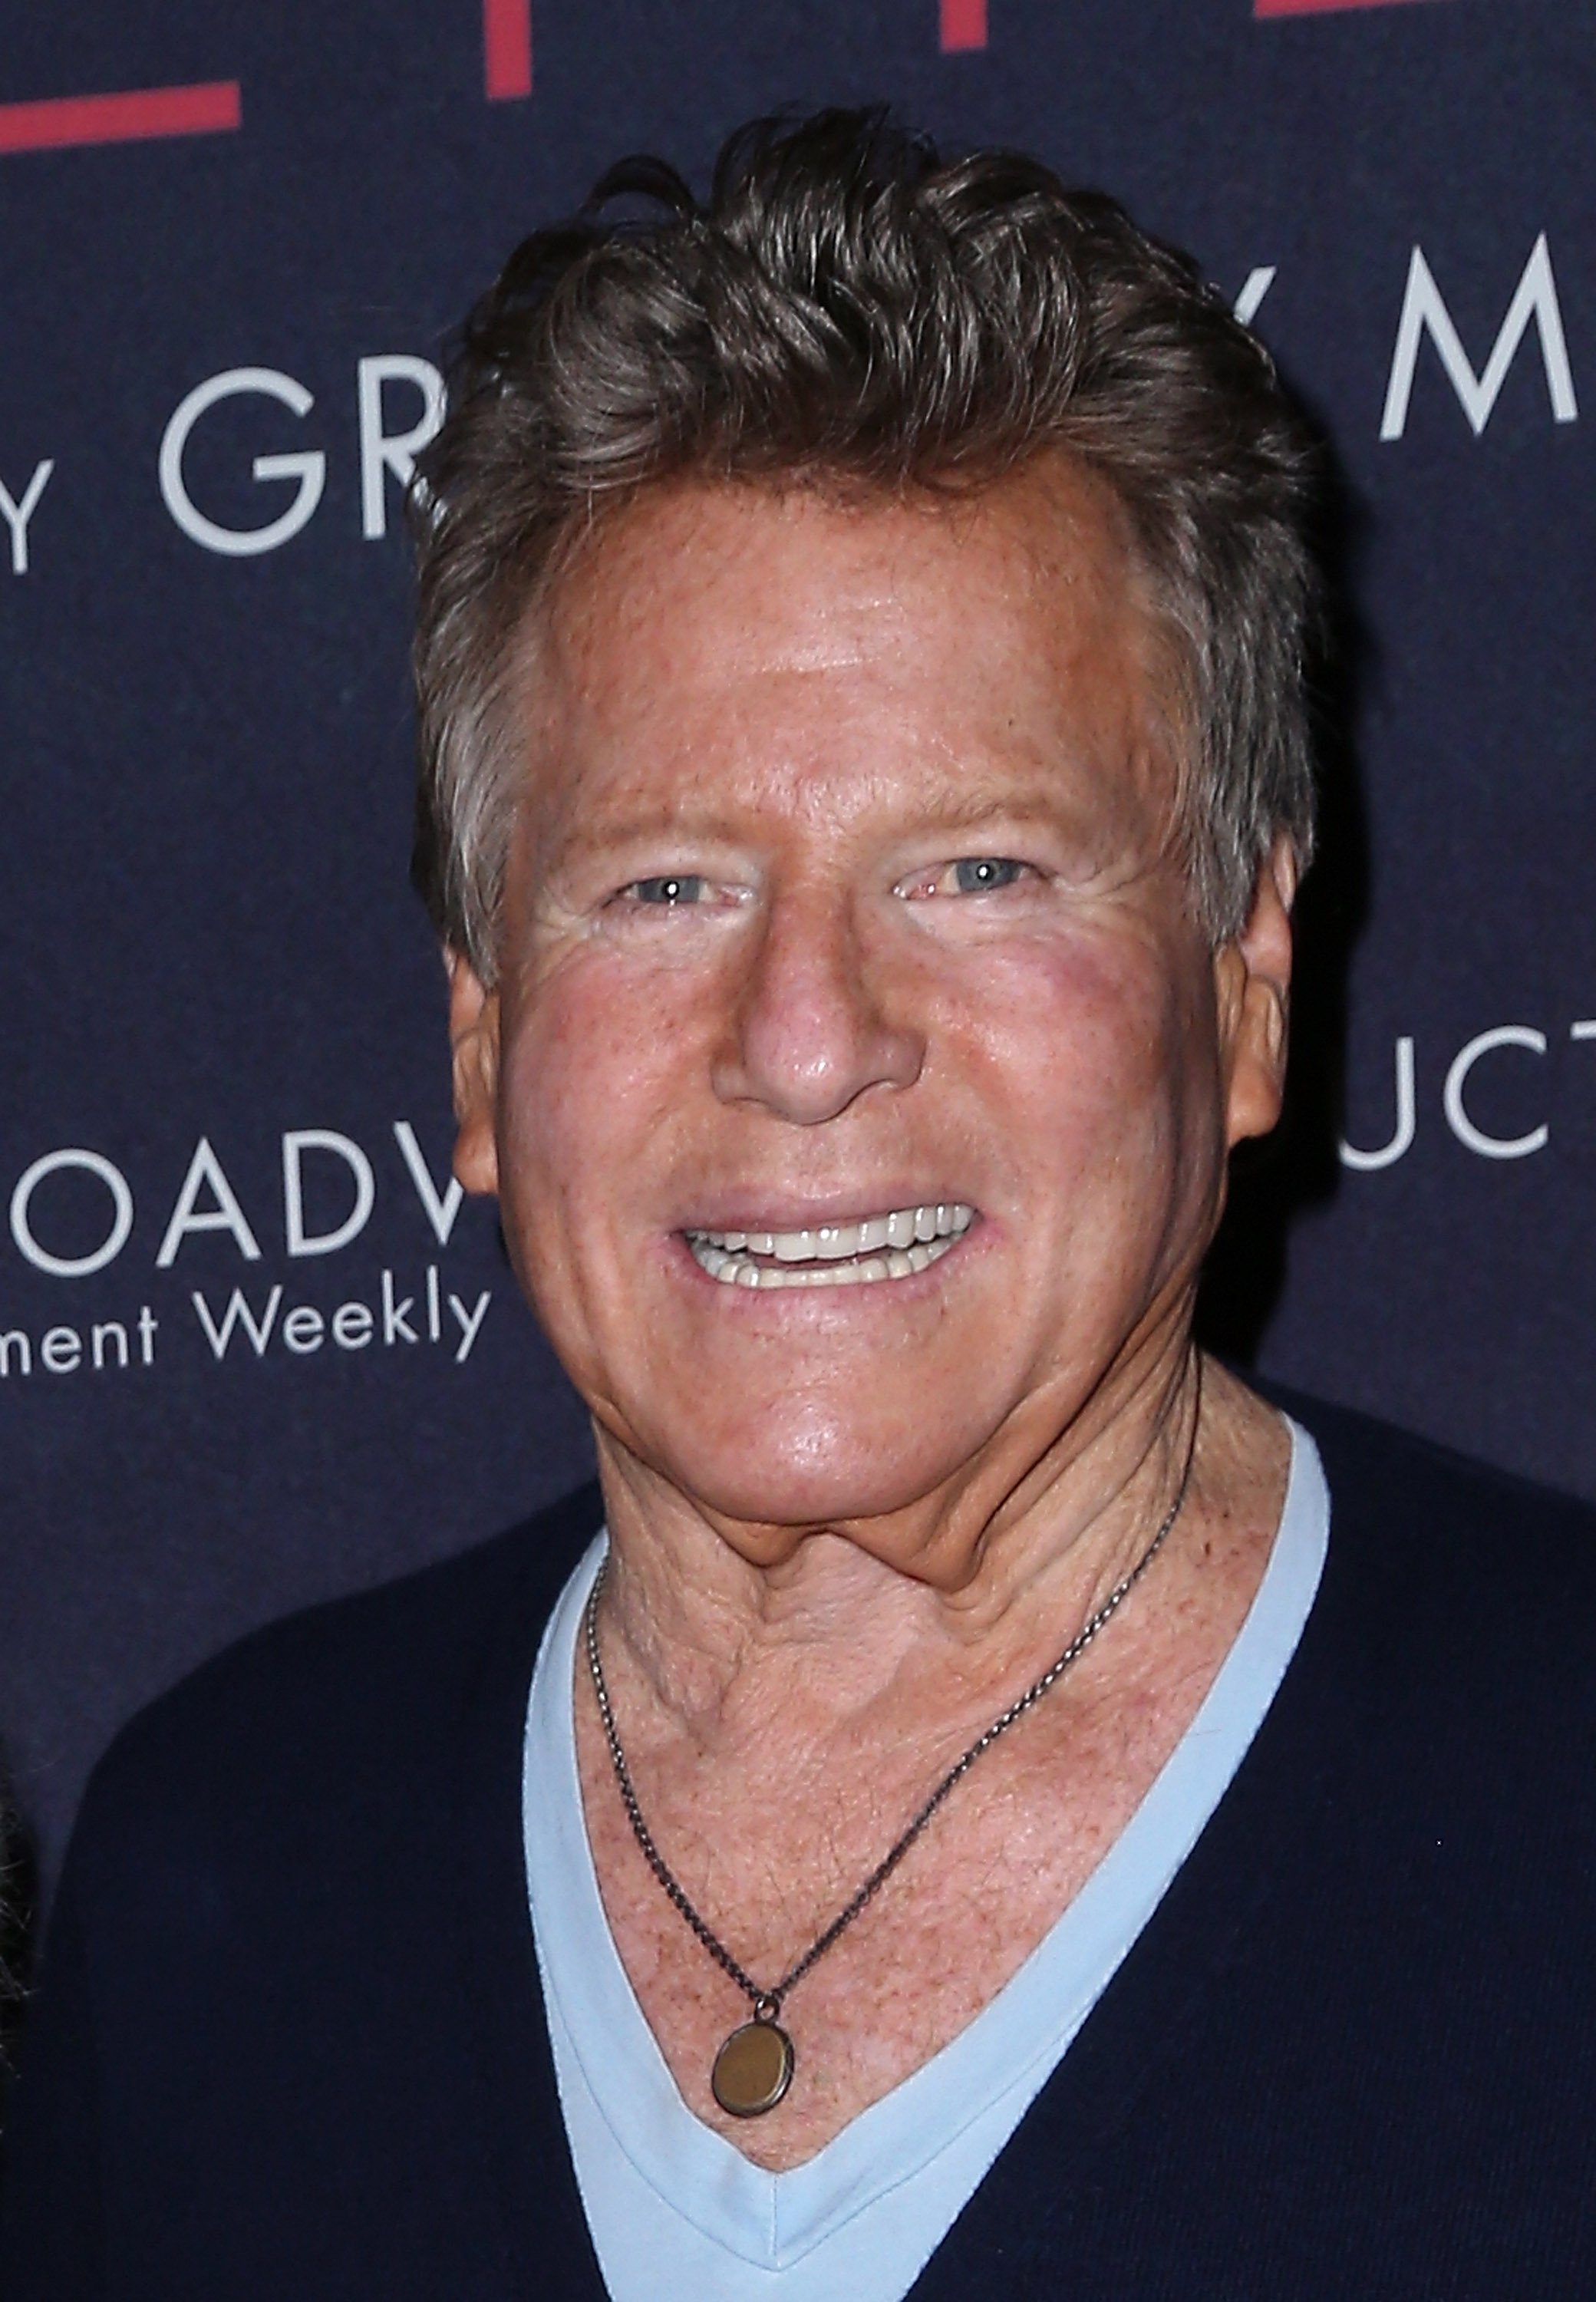 Actor Ryan O'Neal attends the curtain call for "Love Letters" at the Wallis Annenberg Center for the Performing Arts on October 14, 2015 in Beverly Hills, California.  | Photo: Getty Images